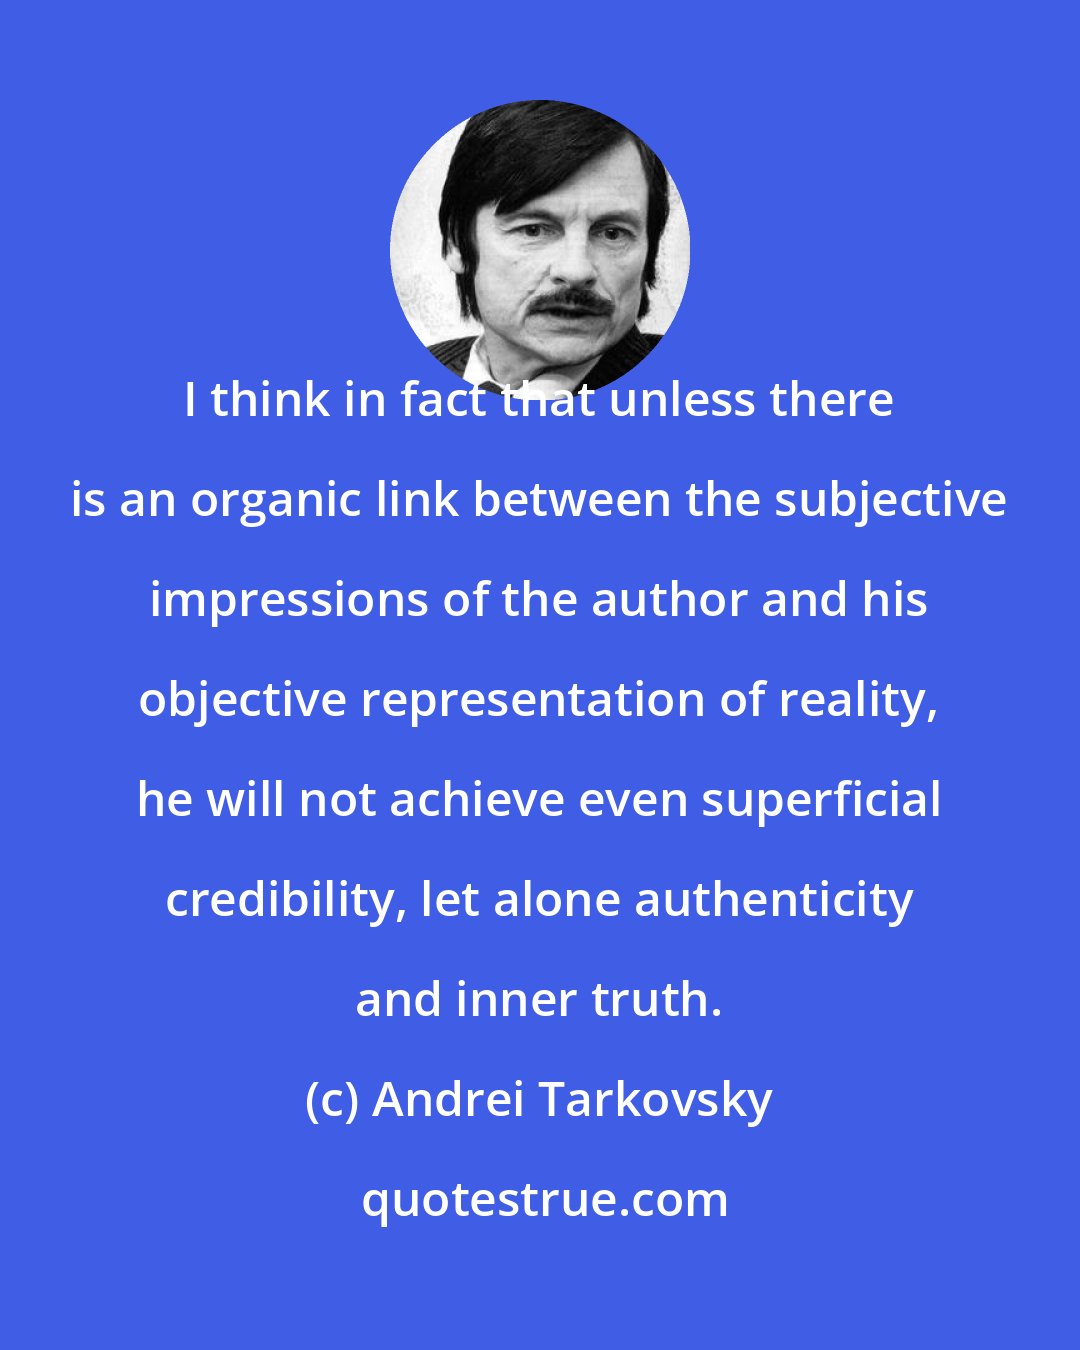 Andrei Tarkovsky: I think in fact that unless there is an organic link between the subjective impressions of the author and his objective representation of reality, he will not achieve even superficial credibility, let alone authenticity and inner truth.